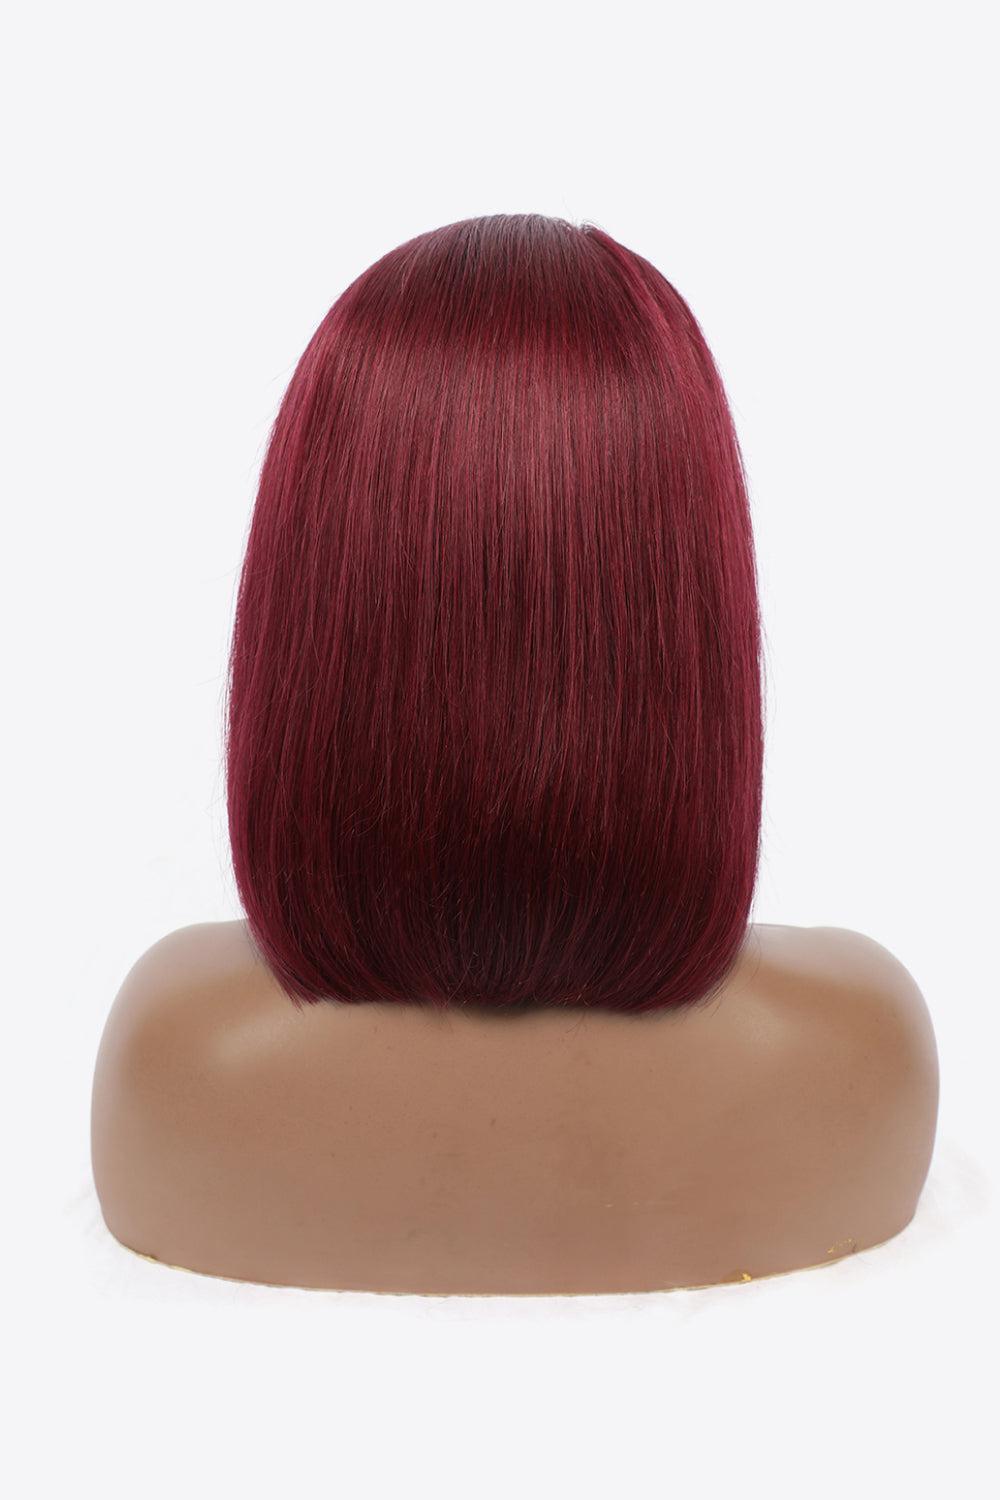 a wig with red hair on a mannequin head